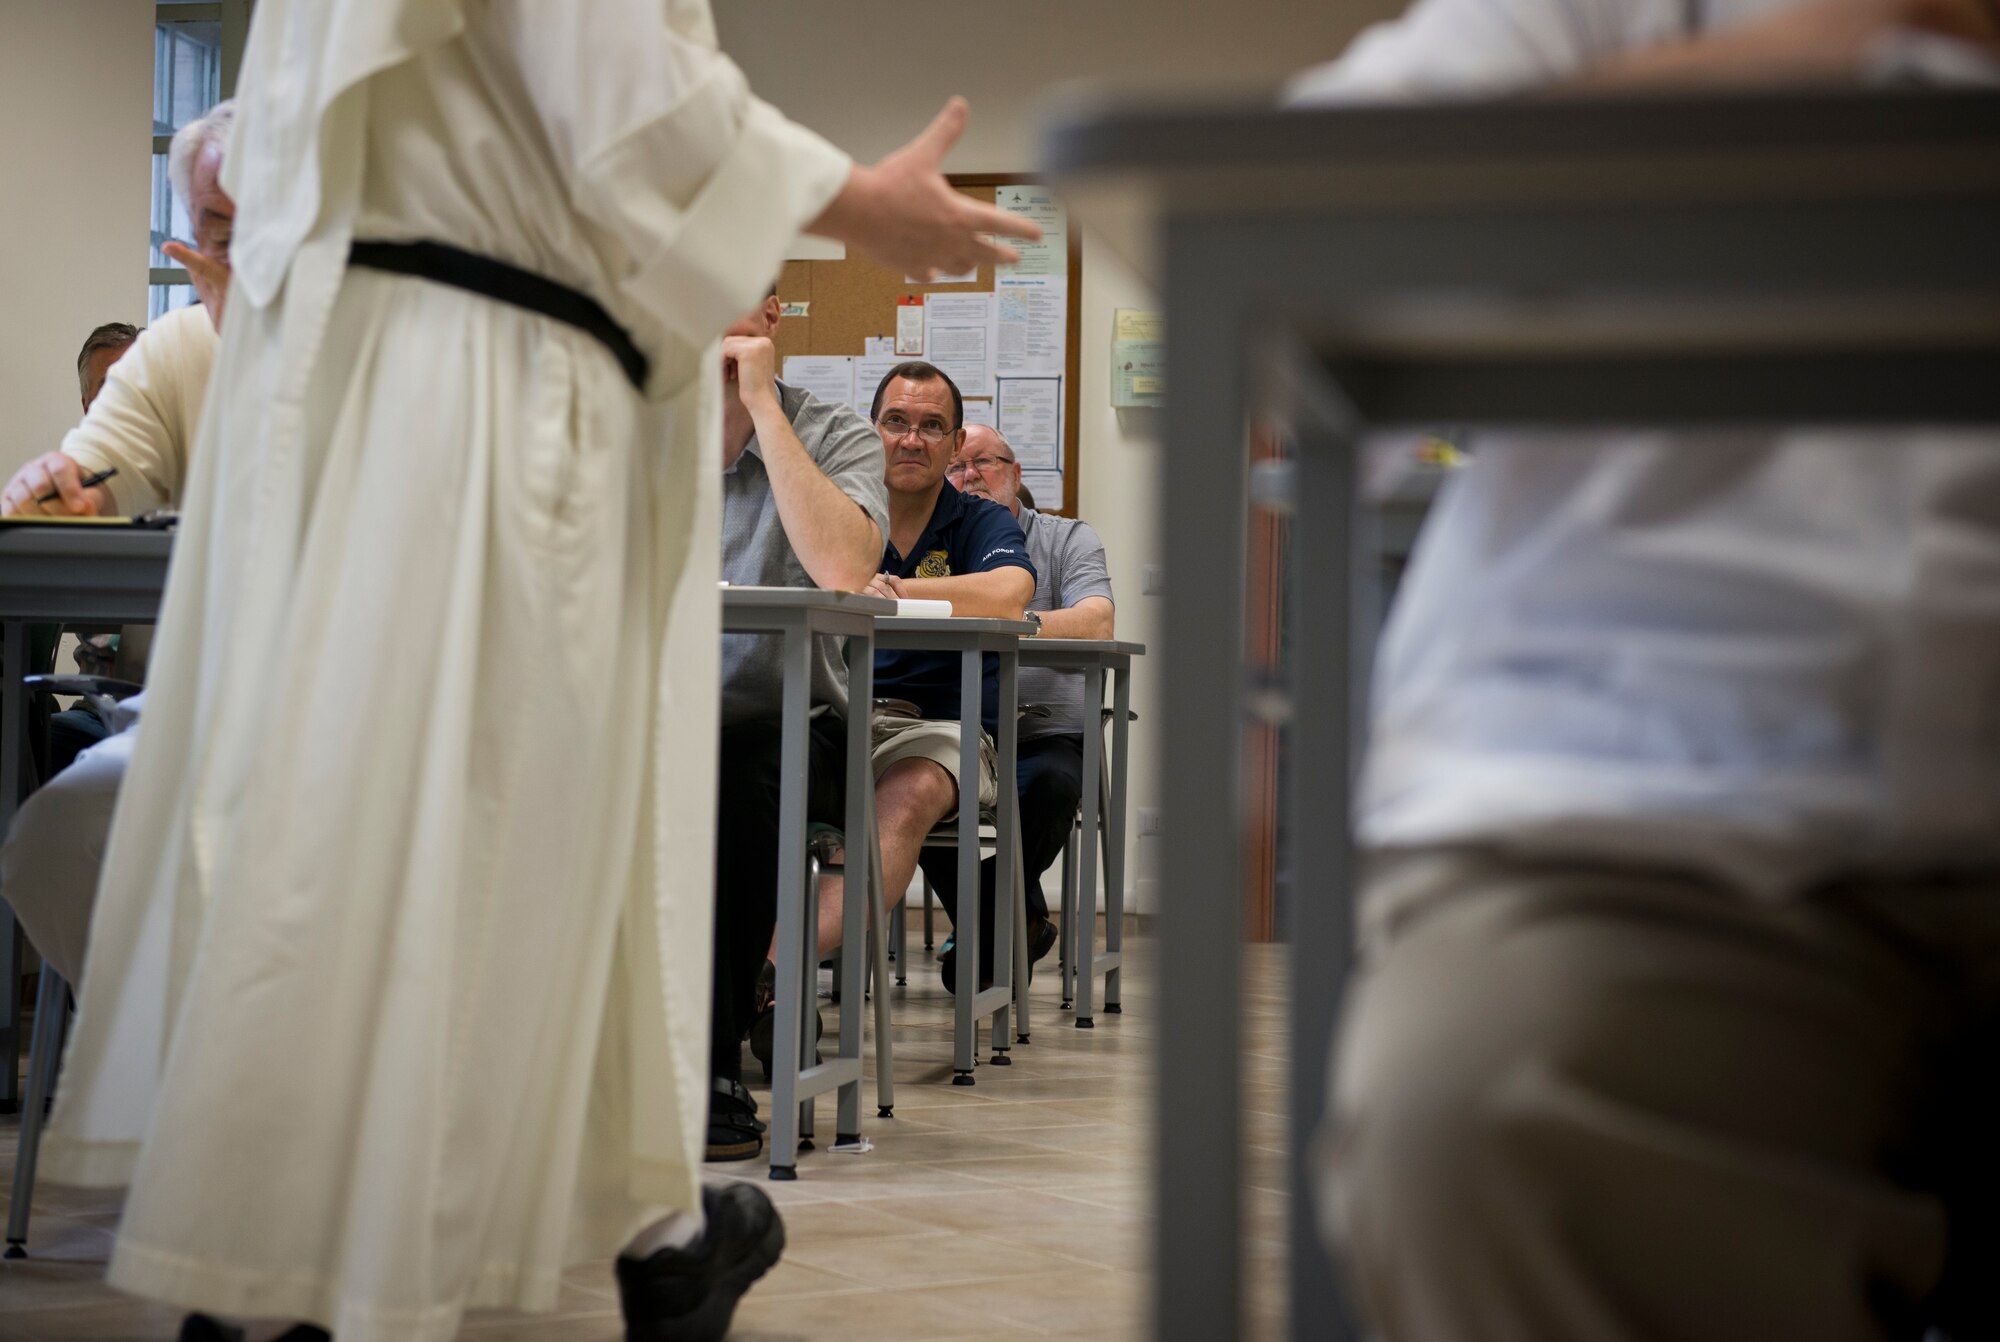 Retired Chaplain (Lt. Col.) Stephen Voyt listens to to the instructor in his class at the Pontifical North American College Institute of Continuing Theological Education. While they are continuing their education, the program is designed to give Catholic priests a sabbatical after years of providing service to others. (U.S. Air Force photo/Staff Sgt. Andrew Lee)